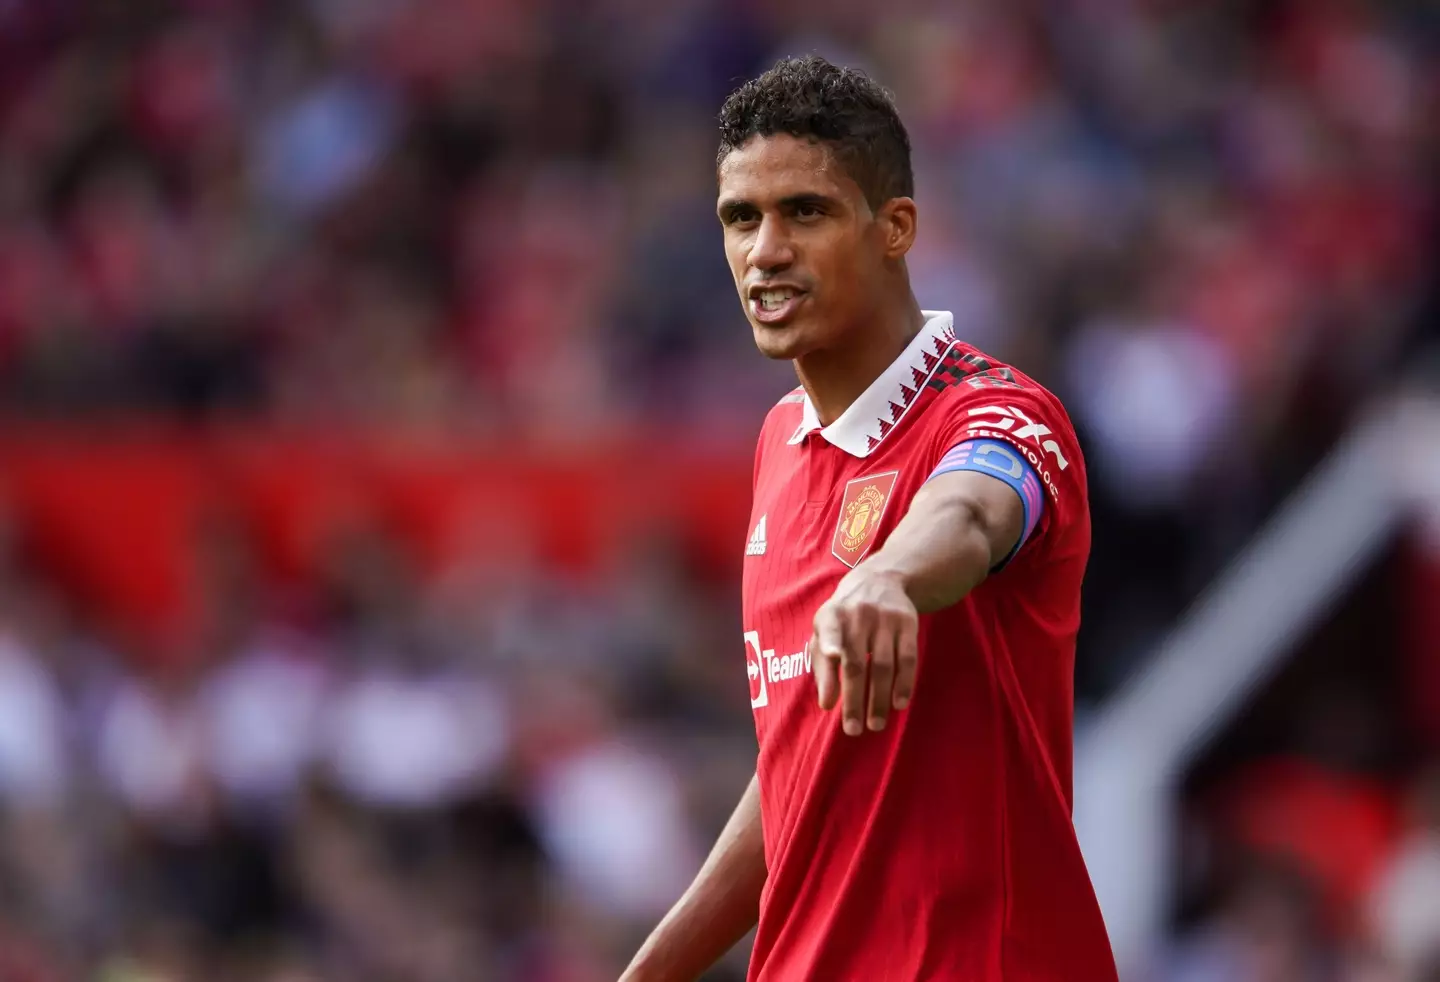 Raphael Varane could be recalled to the side to replace Maguire (Image: Alamy)